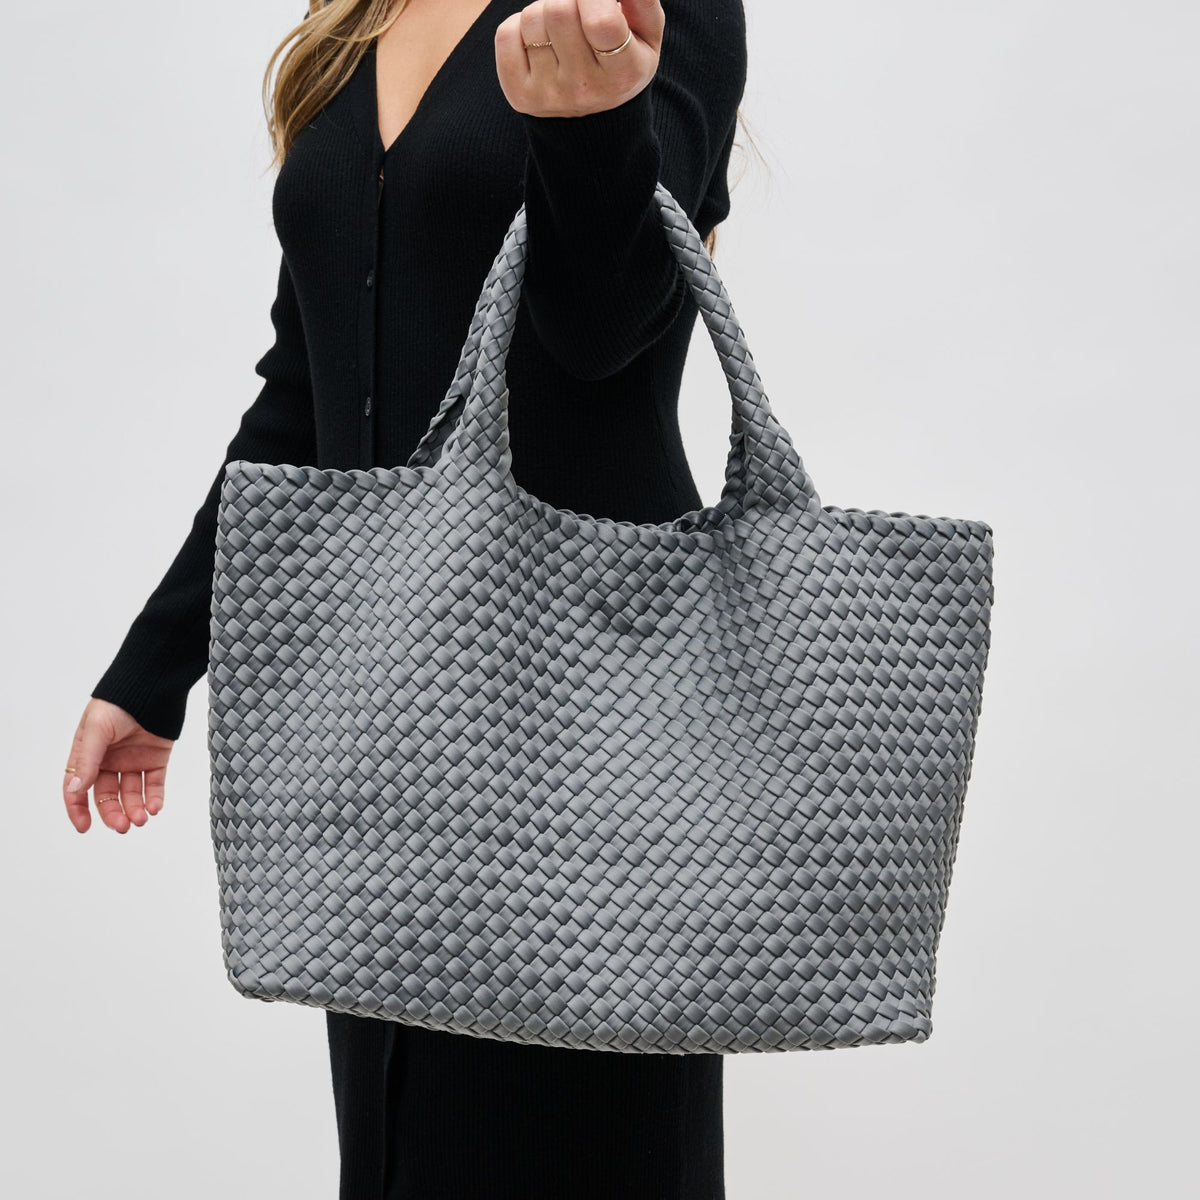 Woman wearing Grey Sol and Selene Sky's The Limit - Large Tote 841764108218 View 1 | Grey